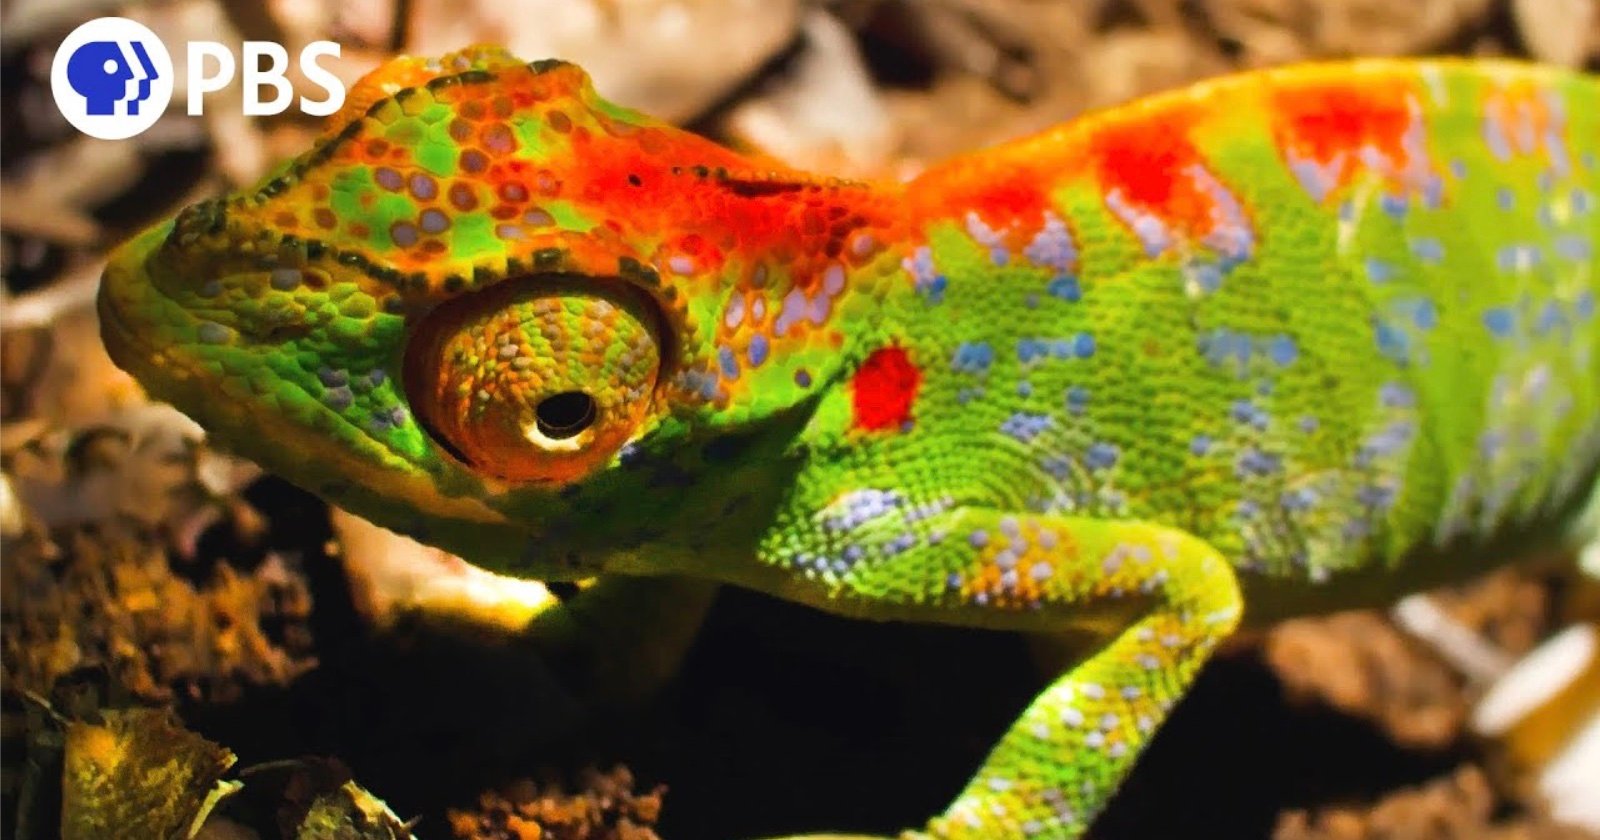 Watch a Chameleon Erupt in Stunning Color Moments Before She Dies